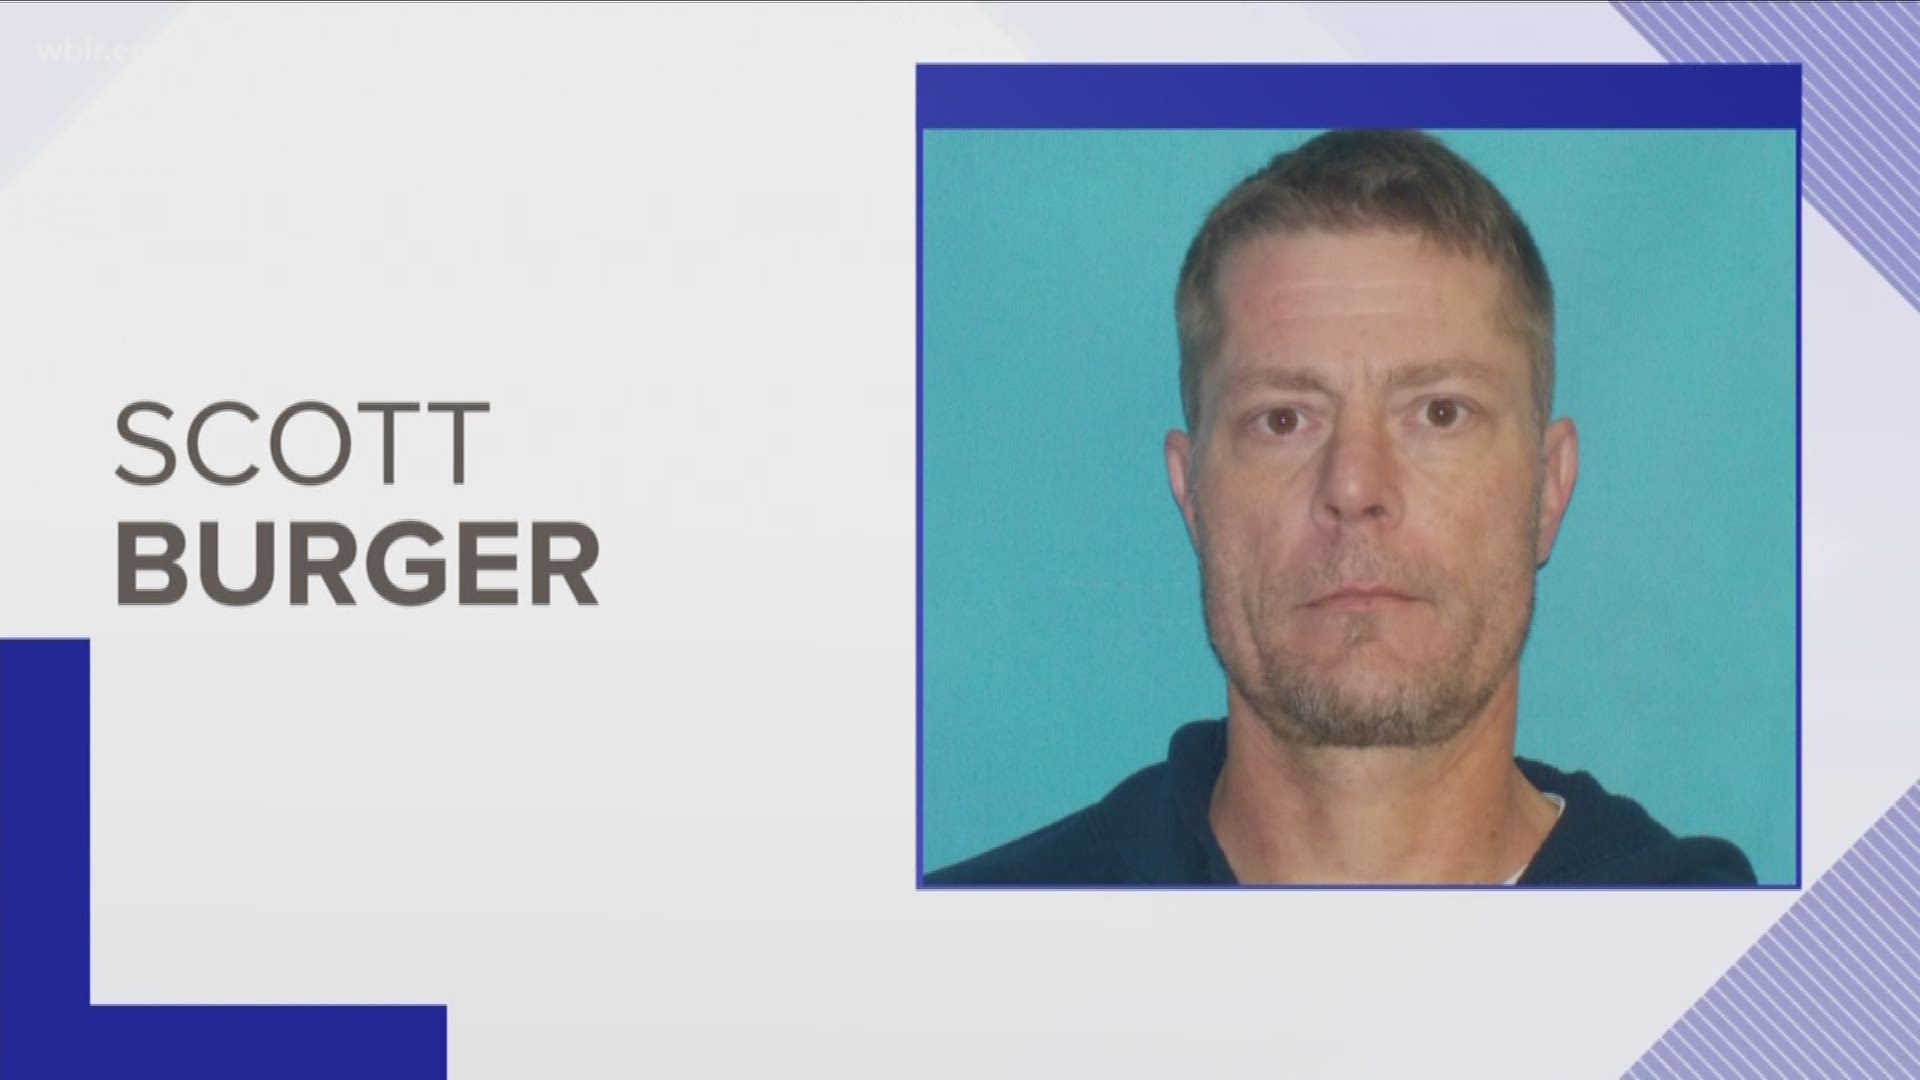 Anyone who sees Scott Burger is asked to call 911 immediately.